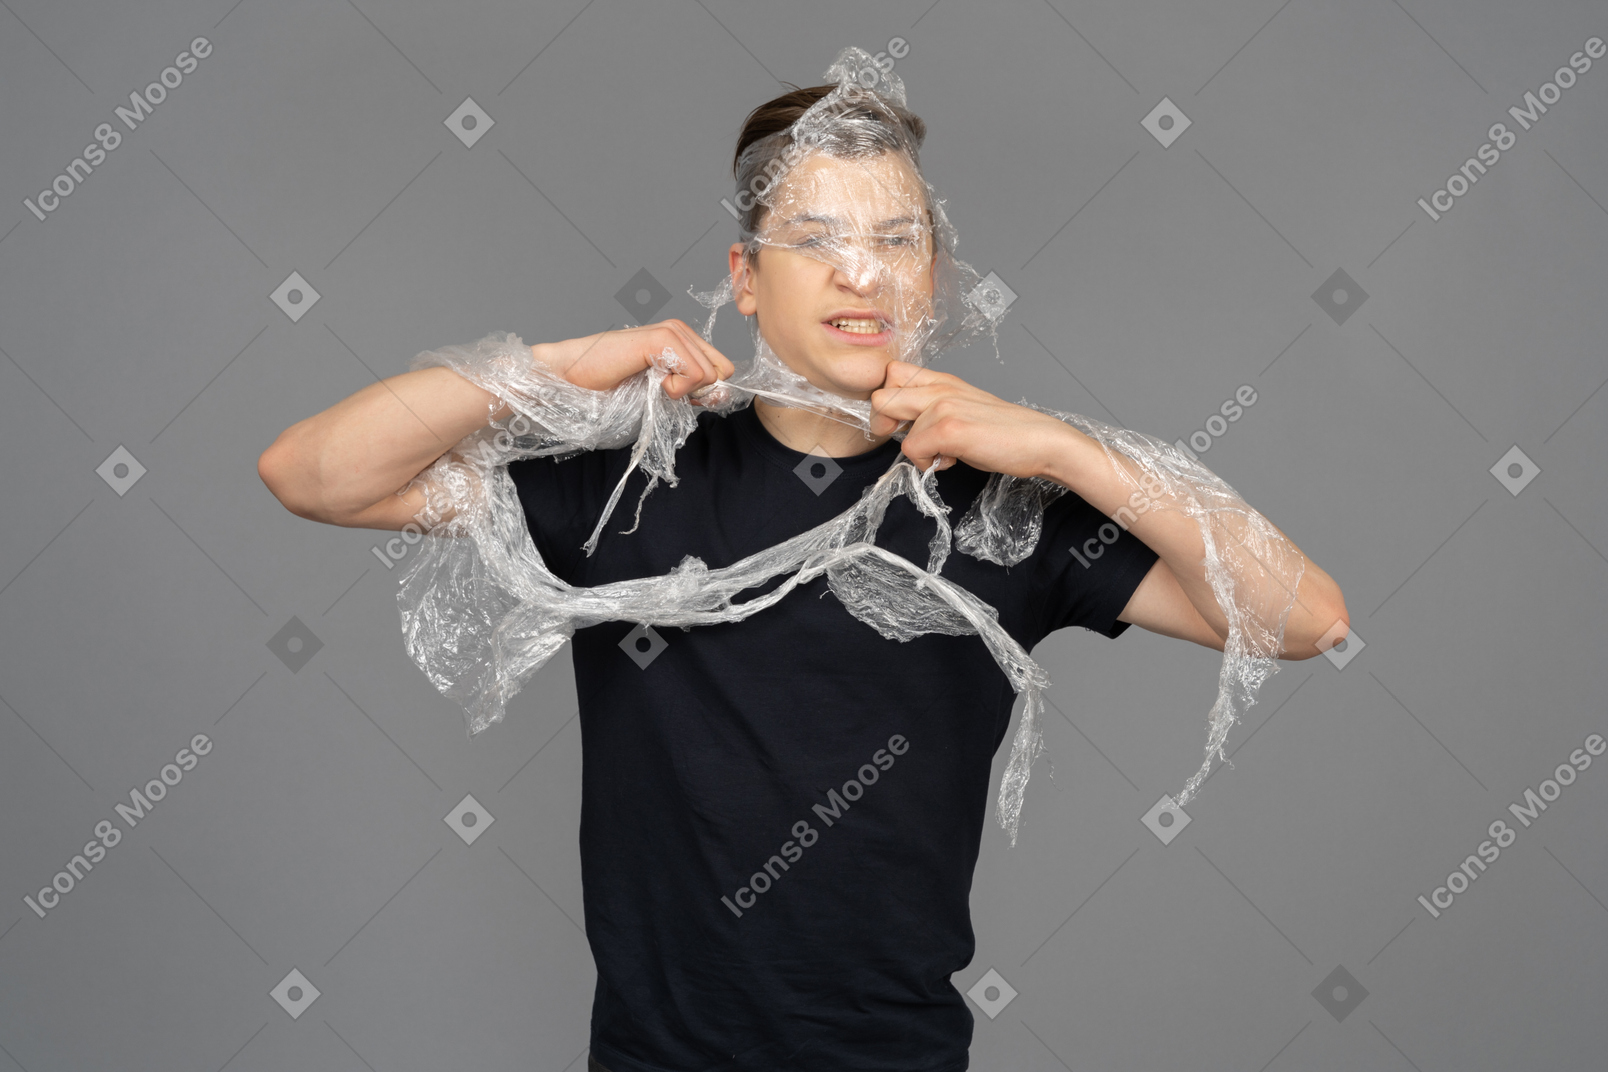 Young man wrapping plastic around him